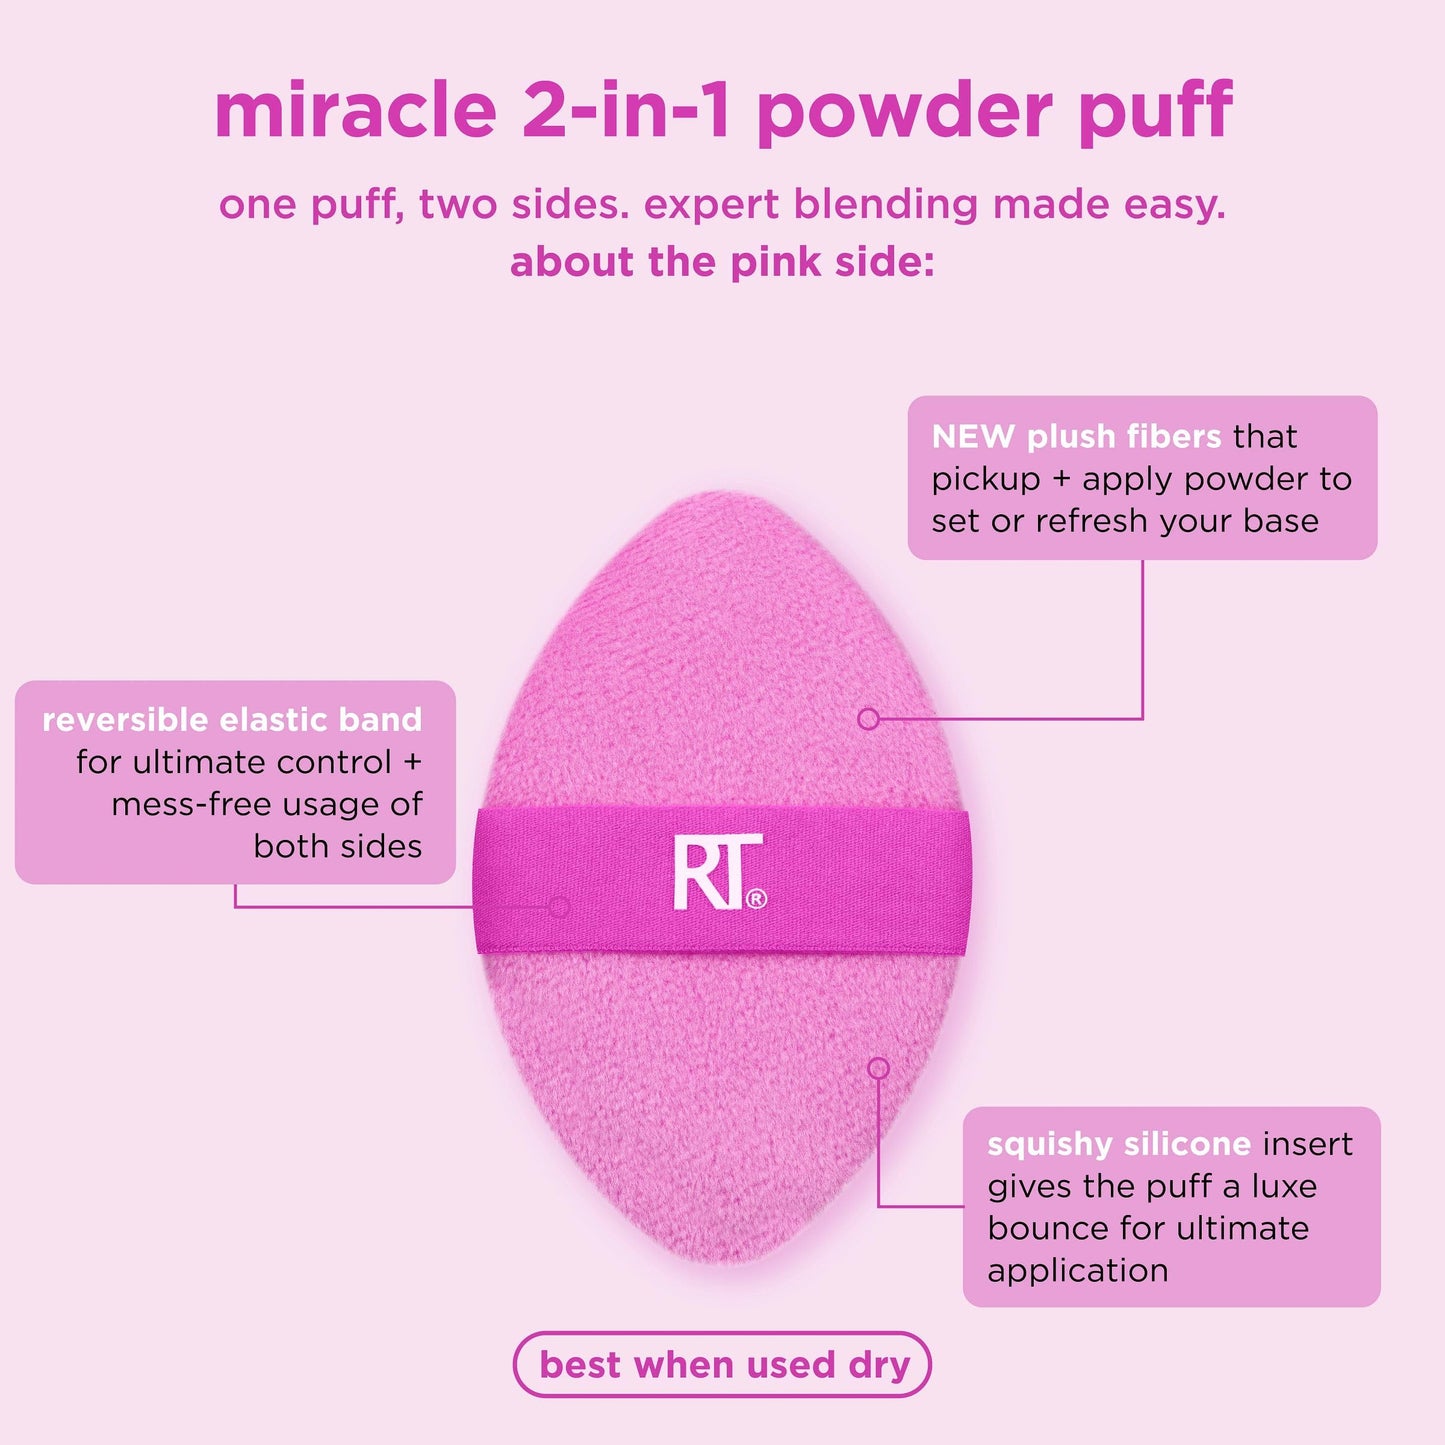 Real Techniques Miracle Complexion Sponge + Miracle 2-In-1 Powder Puff, Makeup Blending Sponge & Dual-Sided Powder Puff, For Liquids, Creams, & Powders, Vegan & Latex-Free, 2 Count